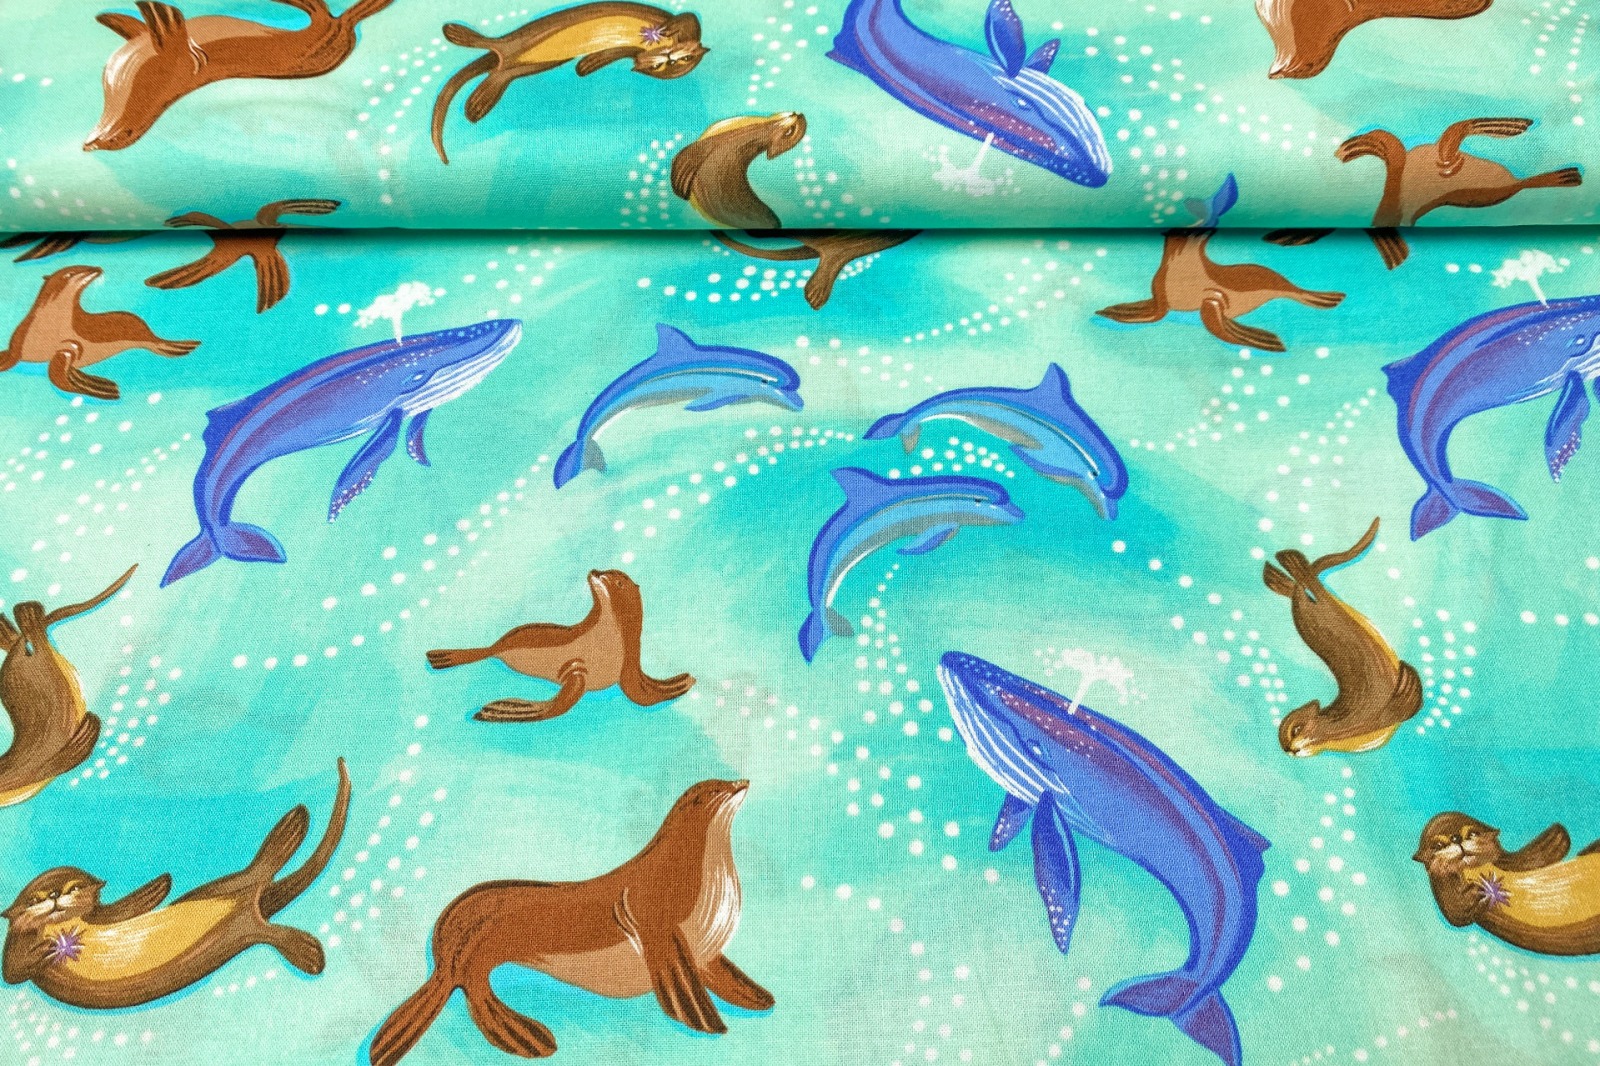 Stoff By The Sea türkis - Wal - Delfin - Otter - Seelöwe | 16,00 EUR/m 3